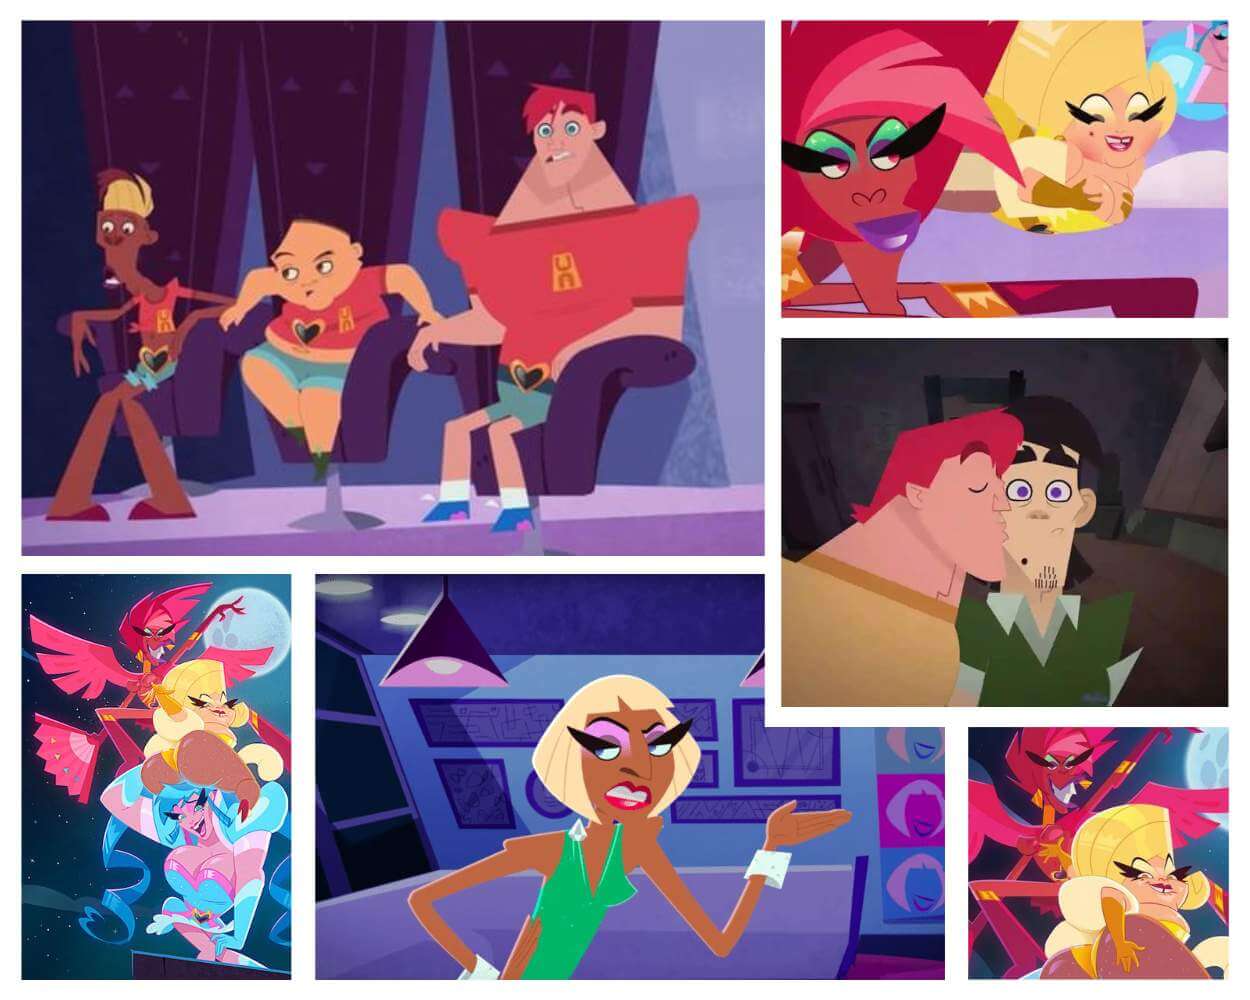 Super Drags A Celebration of Diversity in Animation